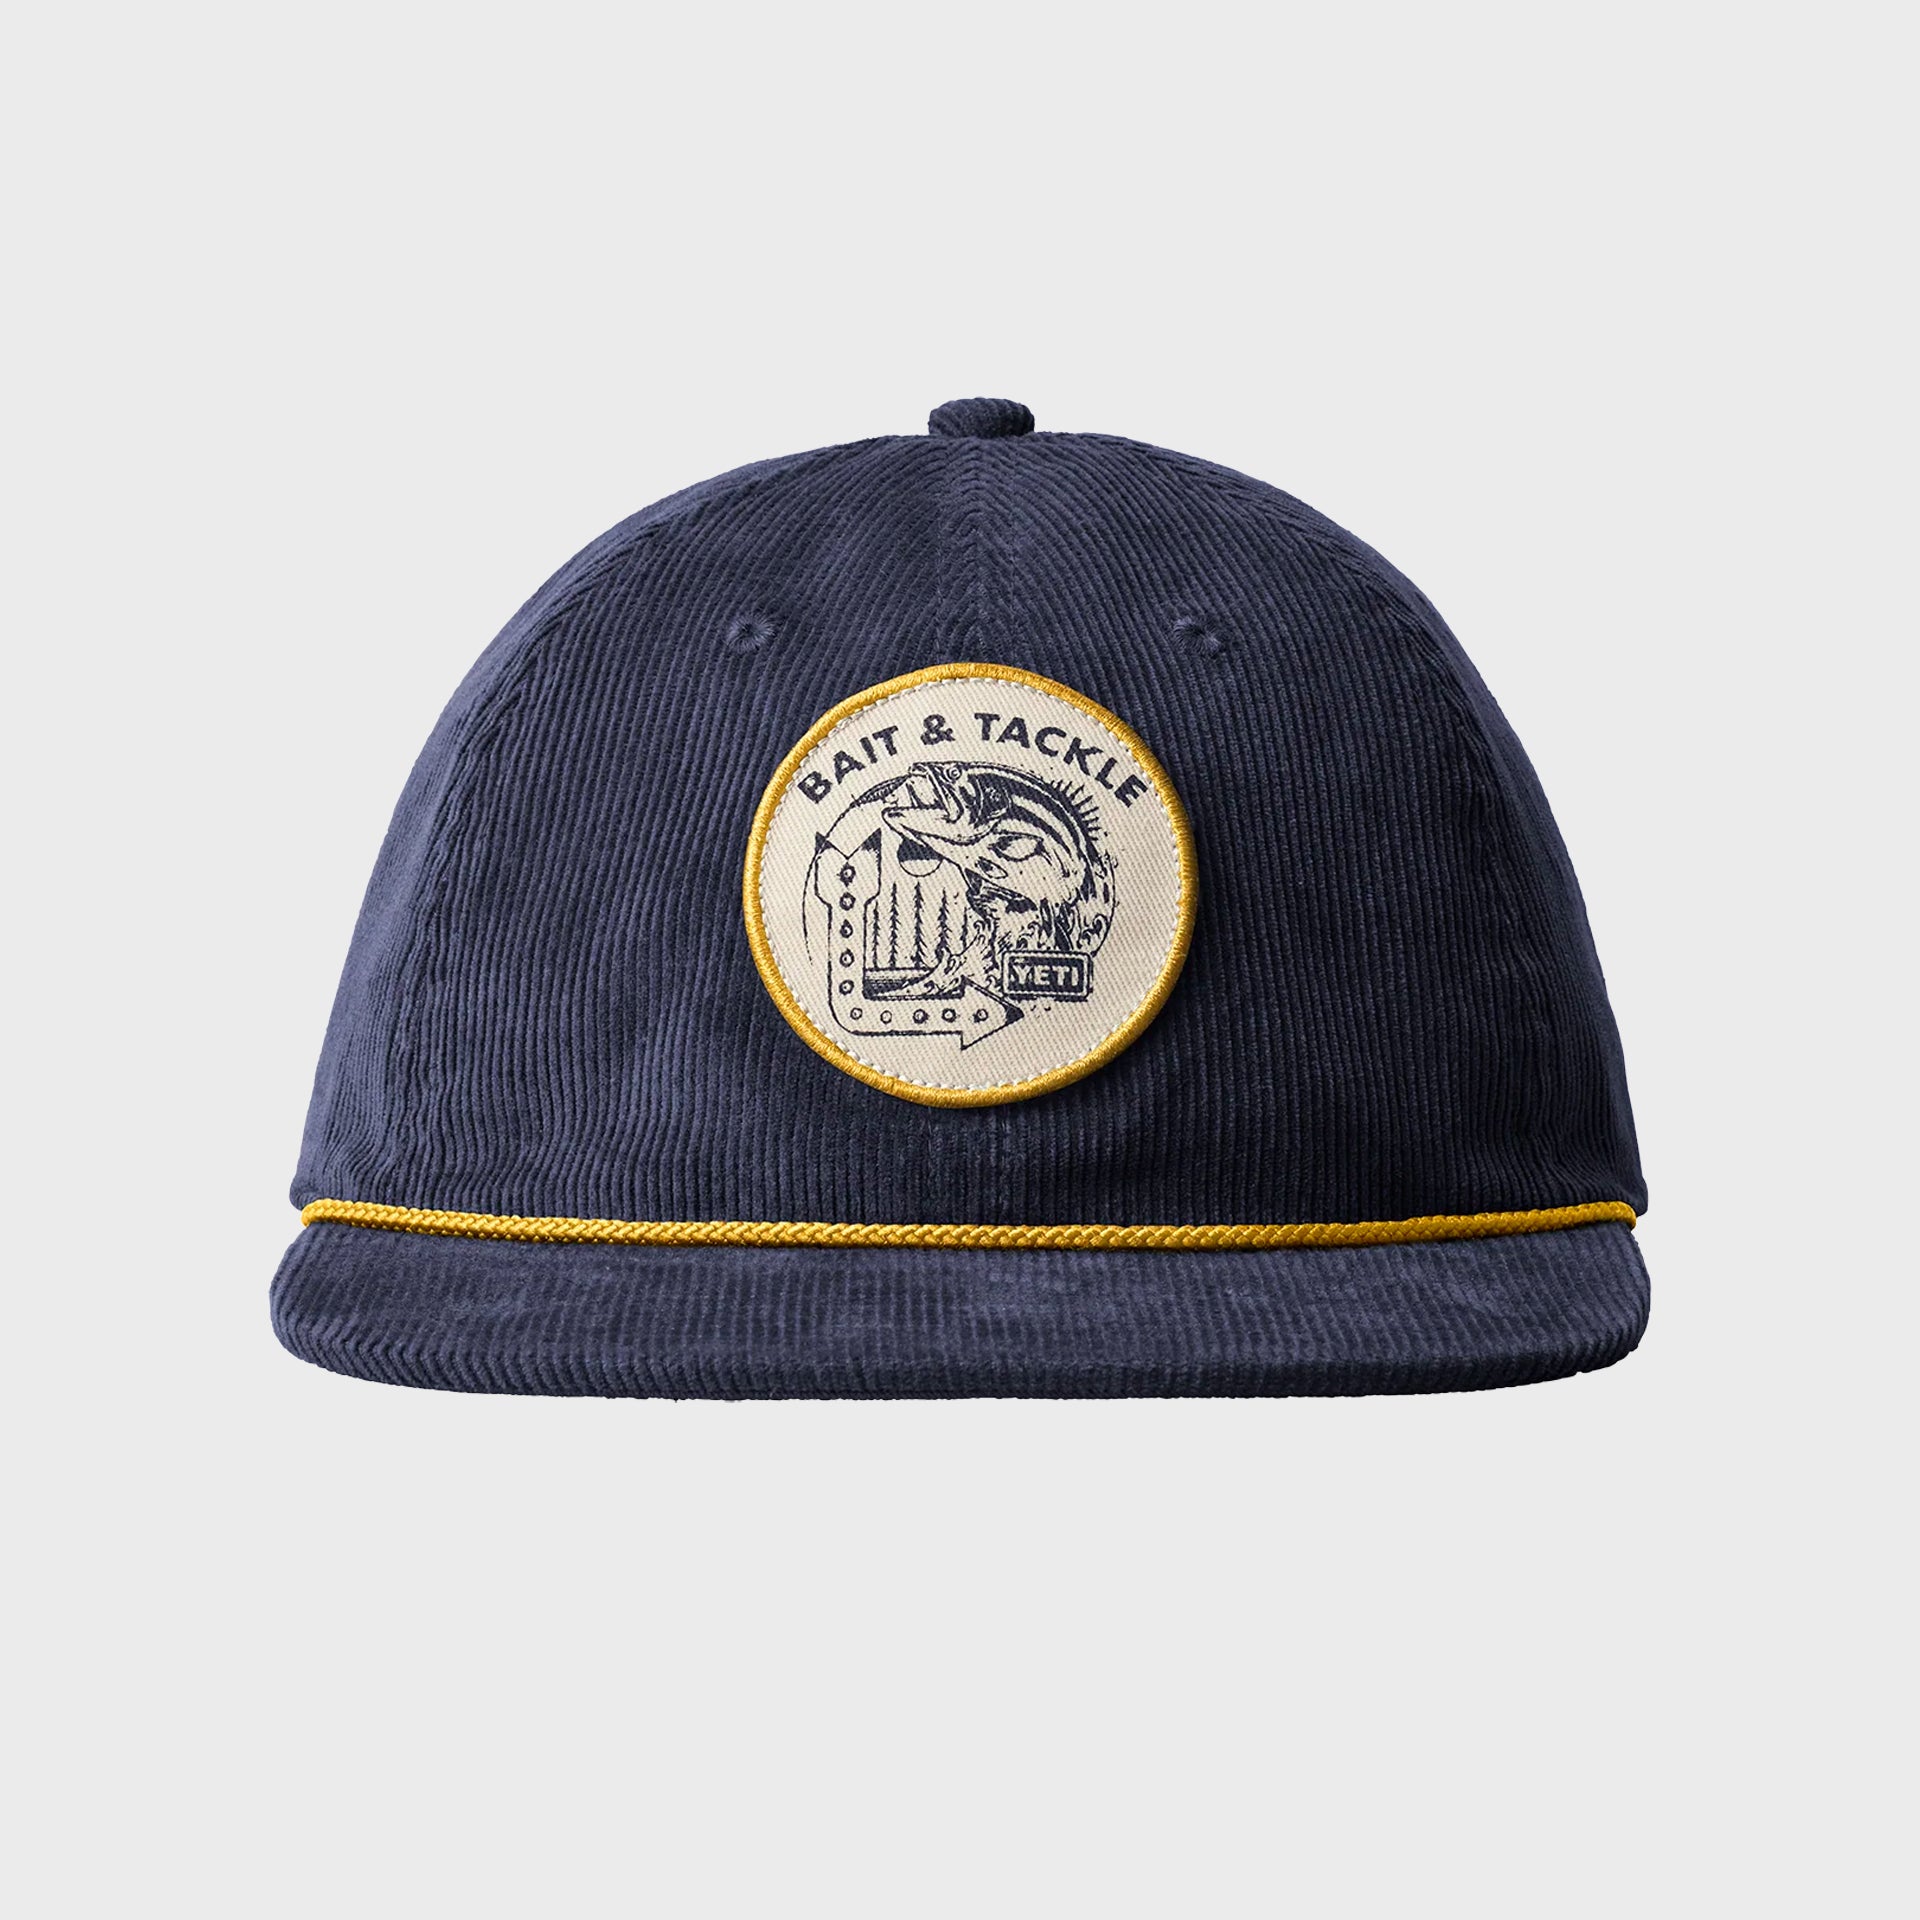 Yeti Bait and Tackle Hat Cap - Navy - ManGo Surfing